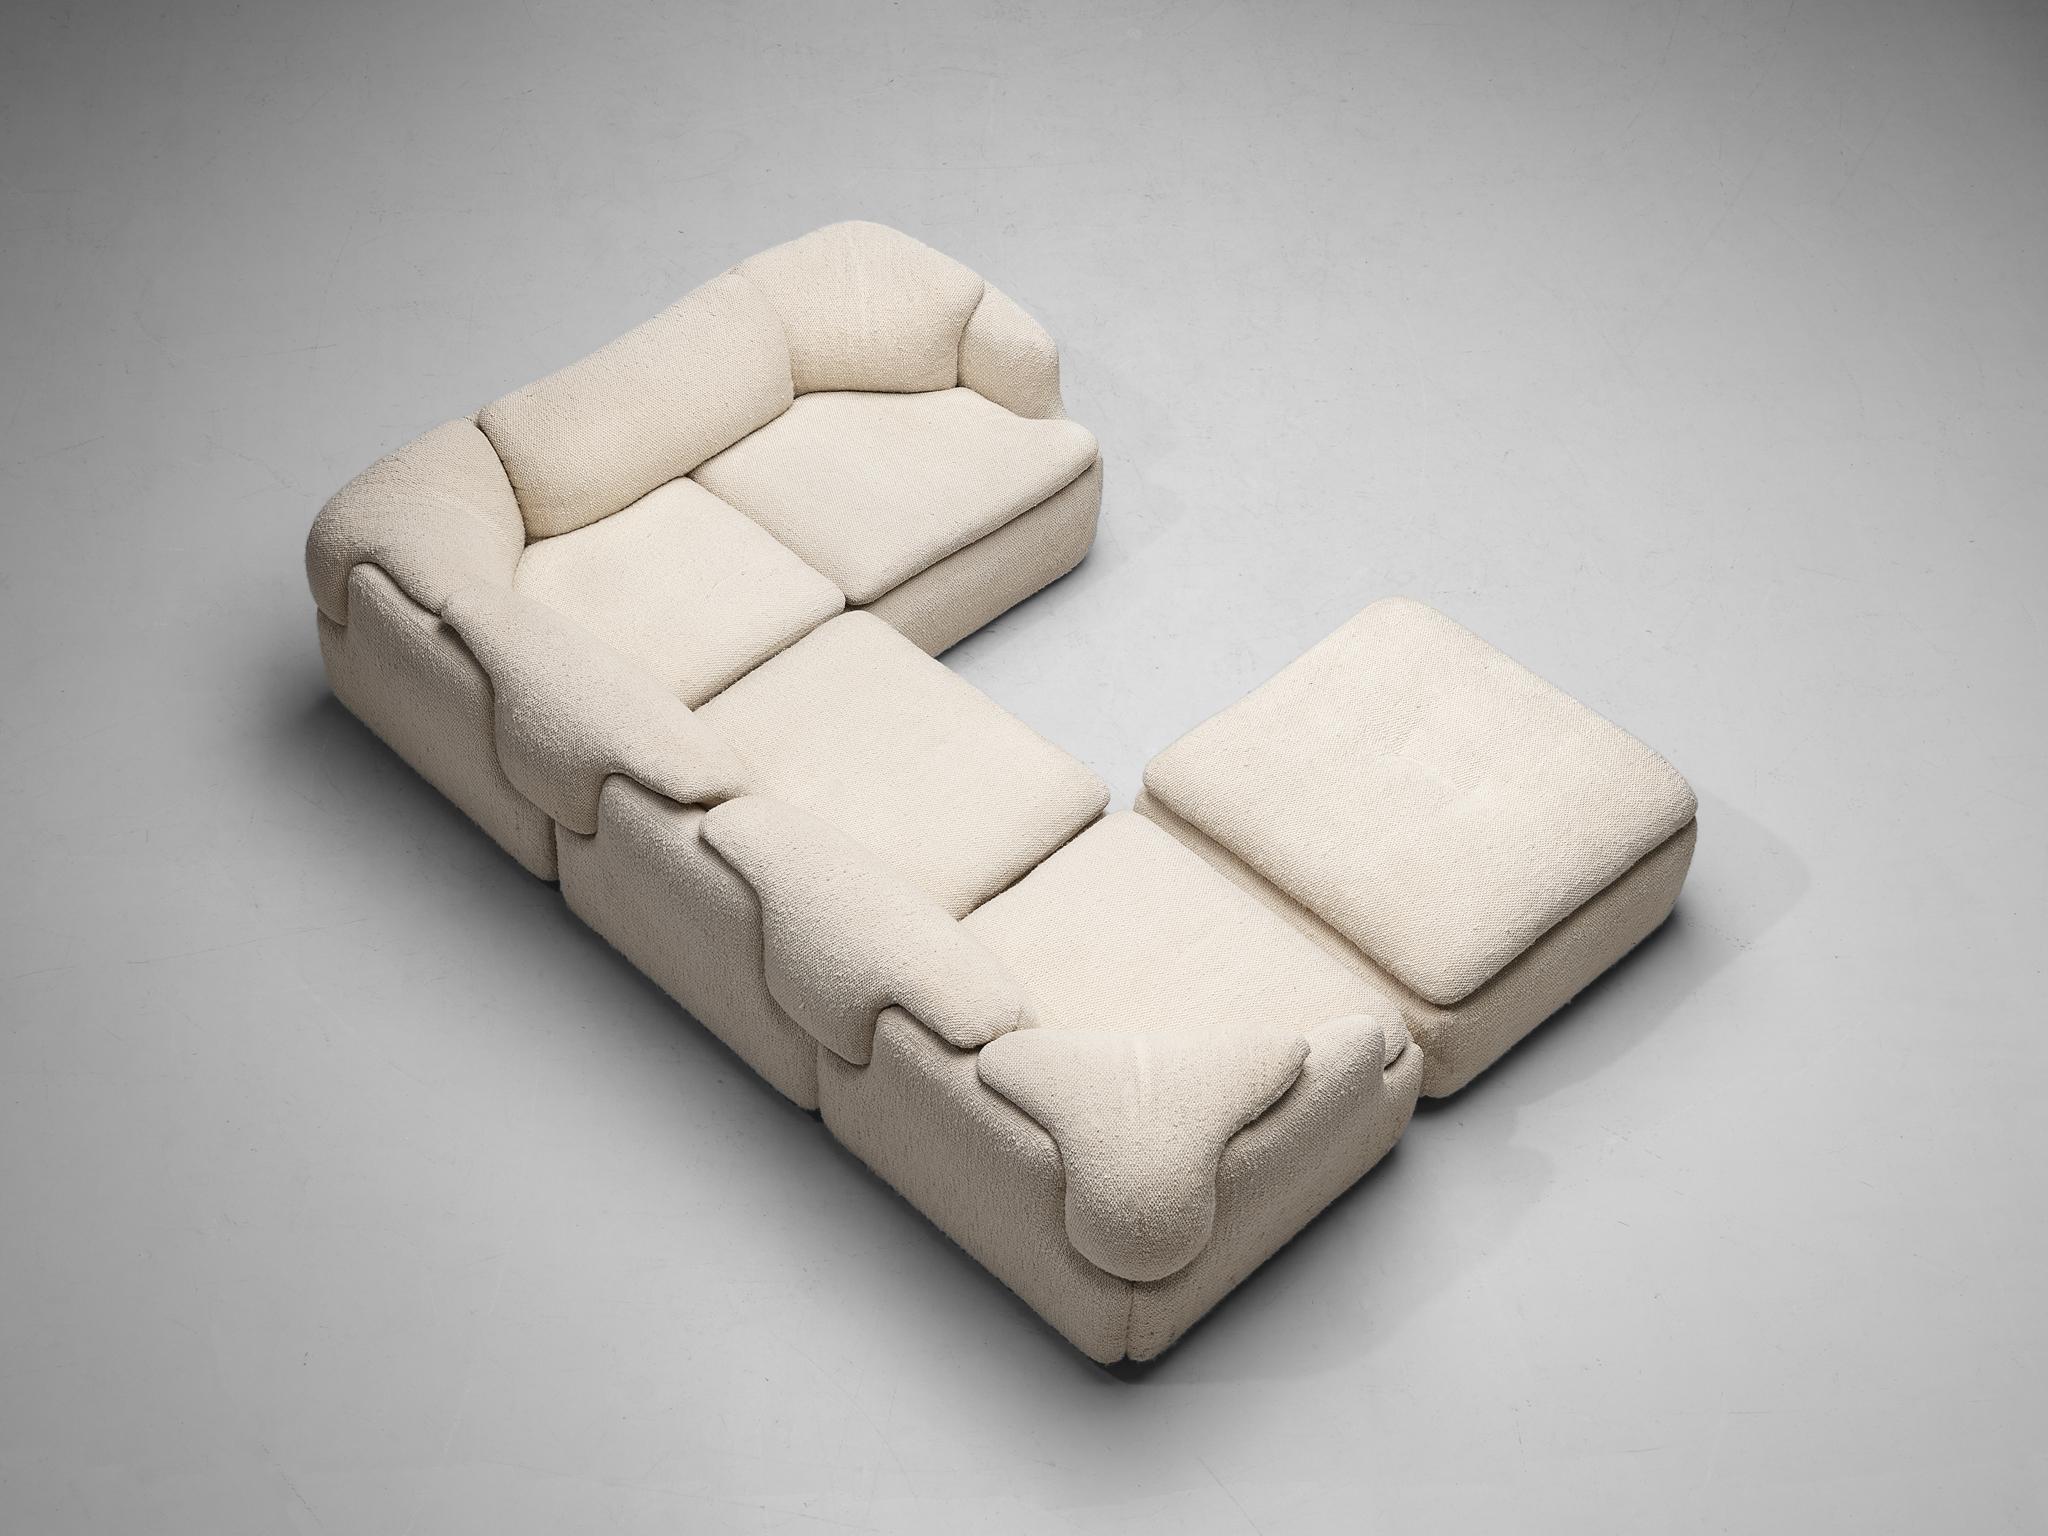 Alberto Rosselli for Saporiti, “Confidential” corner sofa with ottoman, fabric, Italy, 1970s

Large corner sofa designed by Italian architect and furniture designer Alberto Rosselli in 1972 for Saporiti Italia. The sofa is upholstered in white